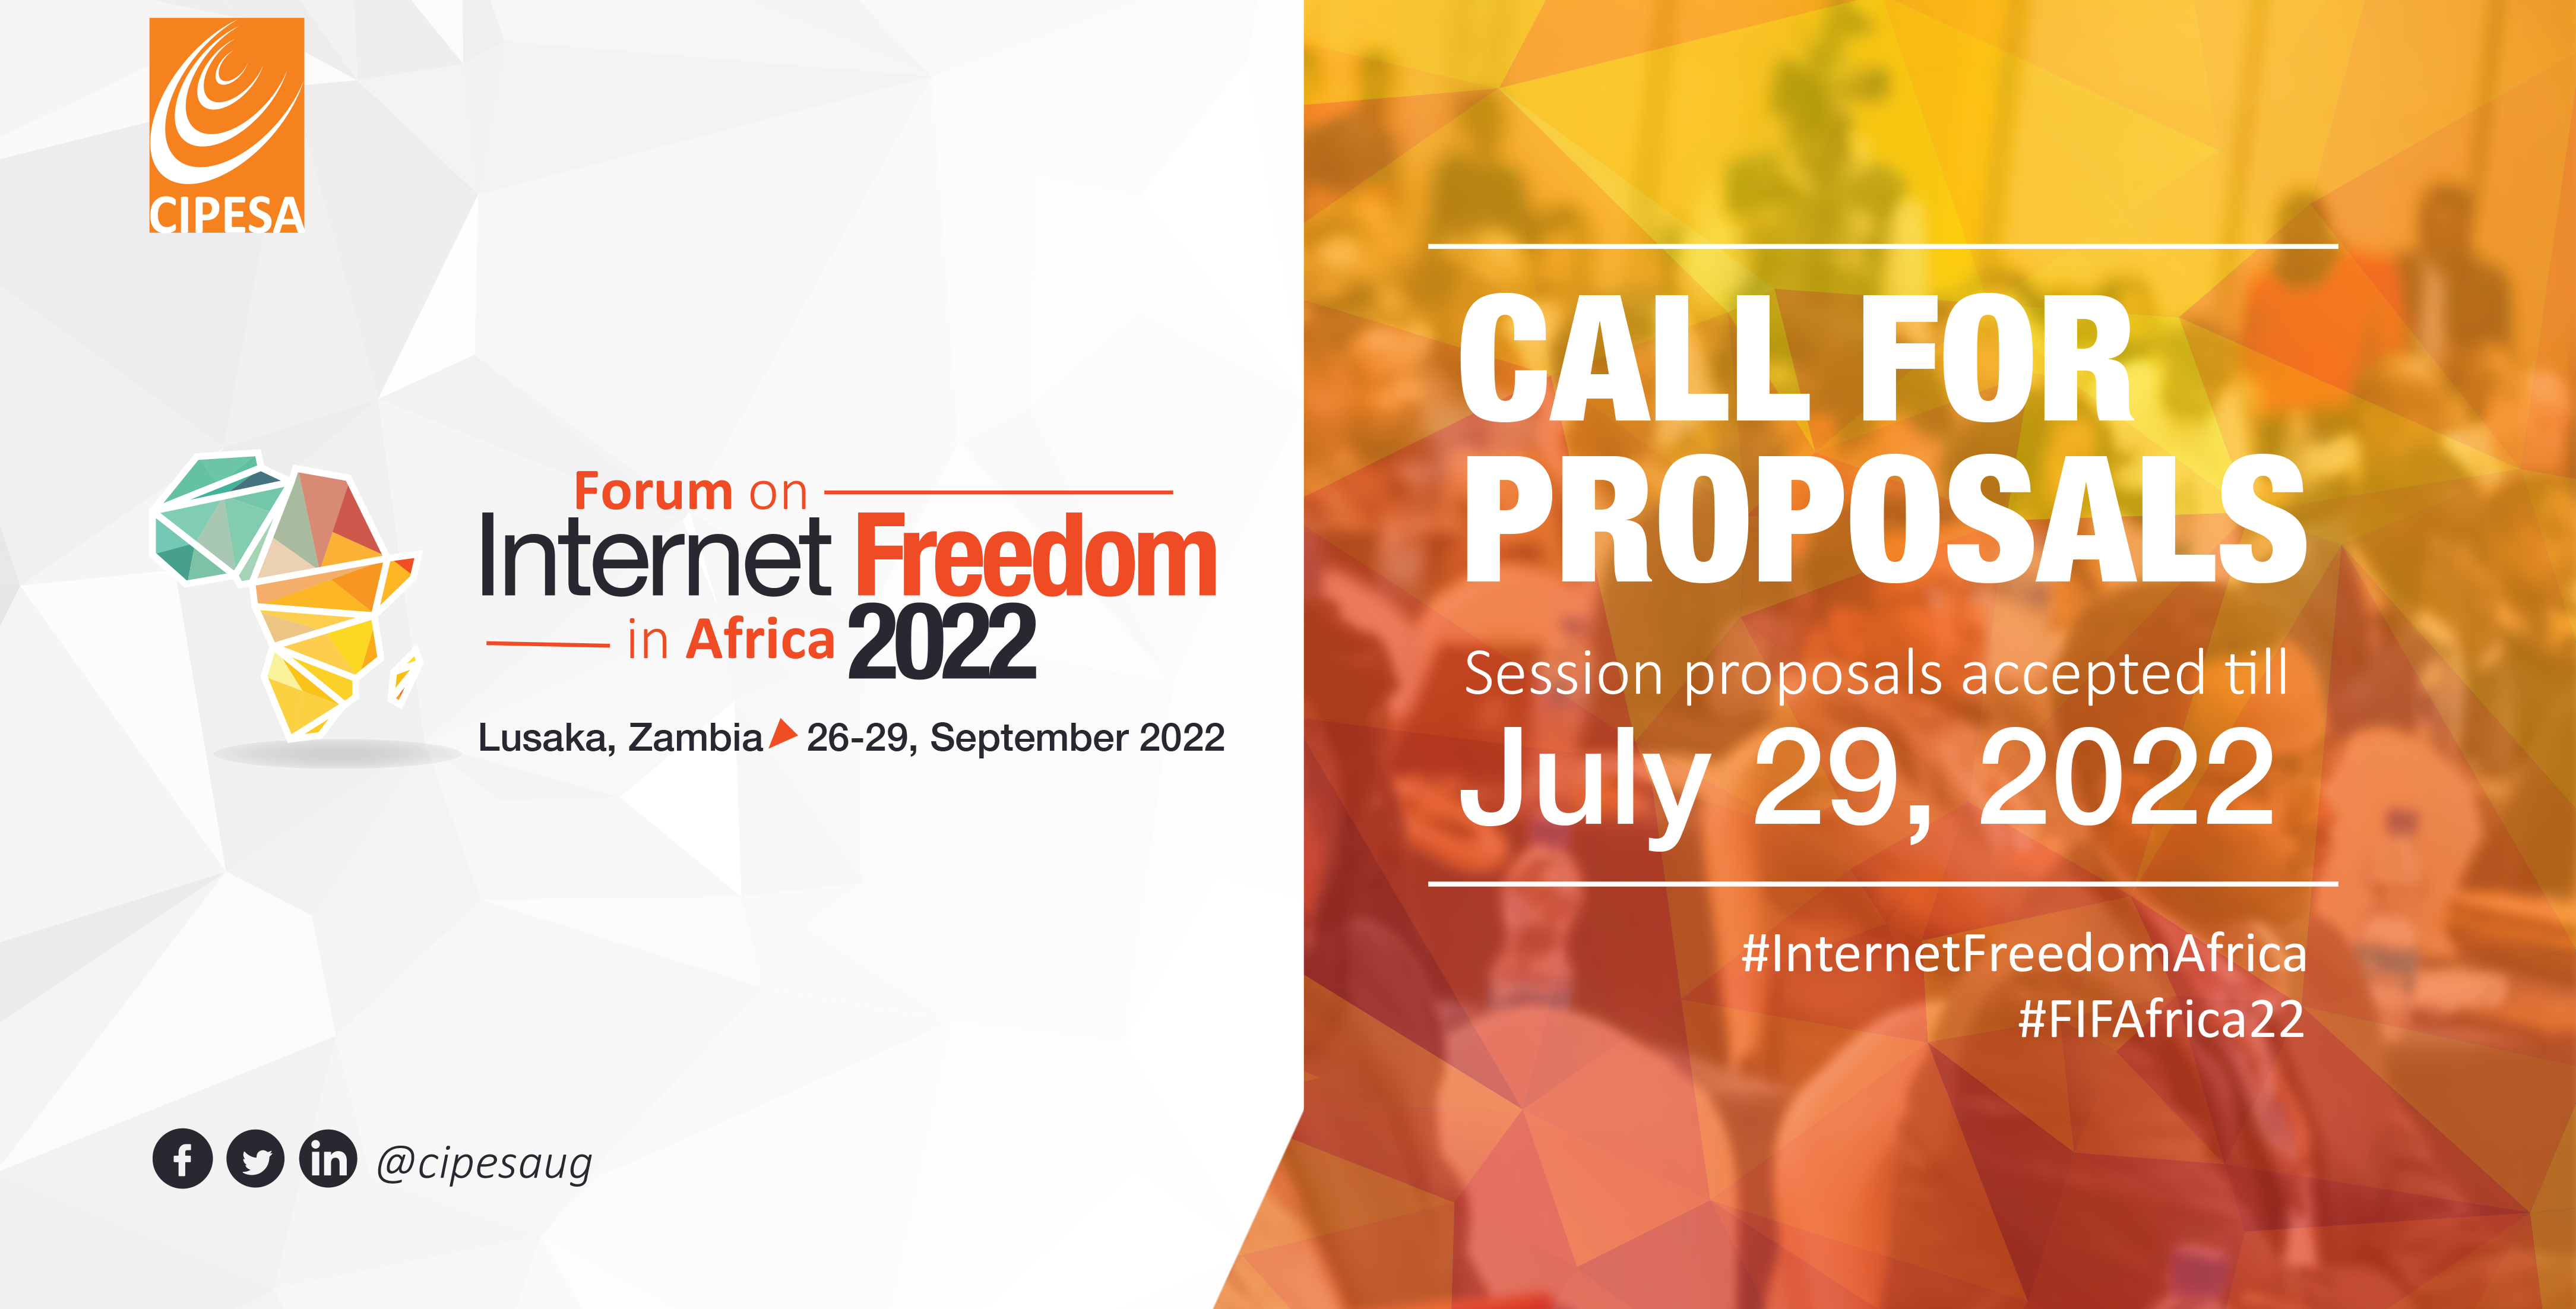 FIFAfrica22: Call for Proposals, Registration Now Open